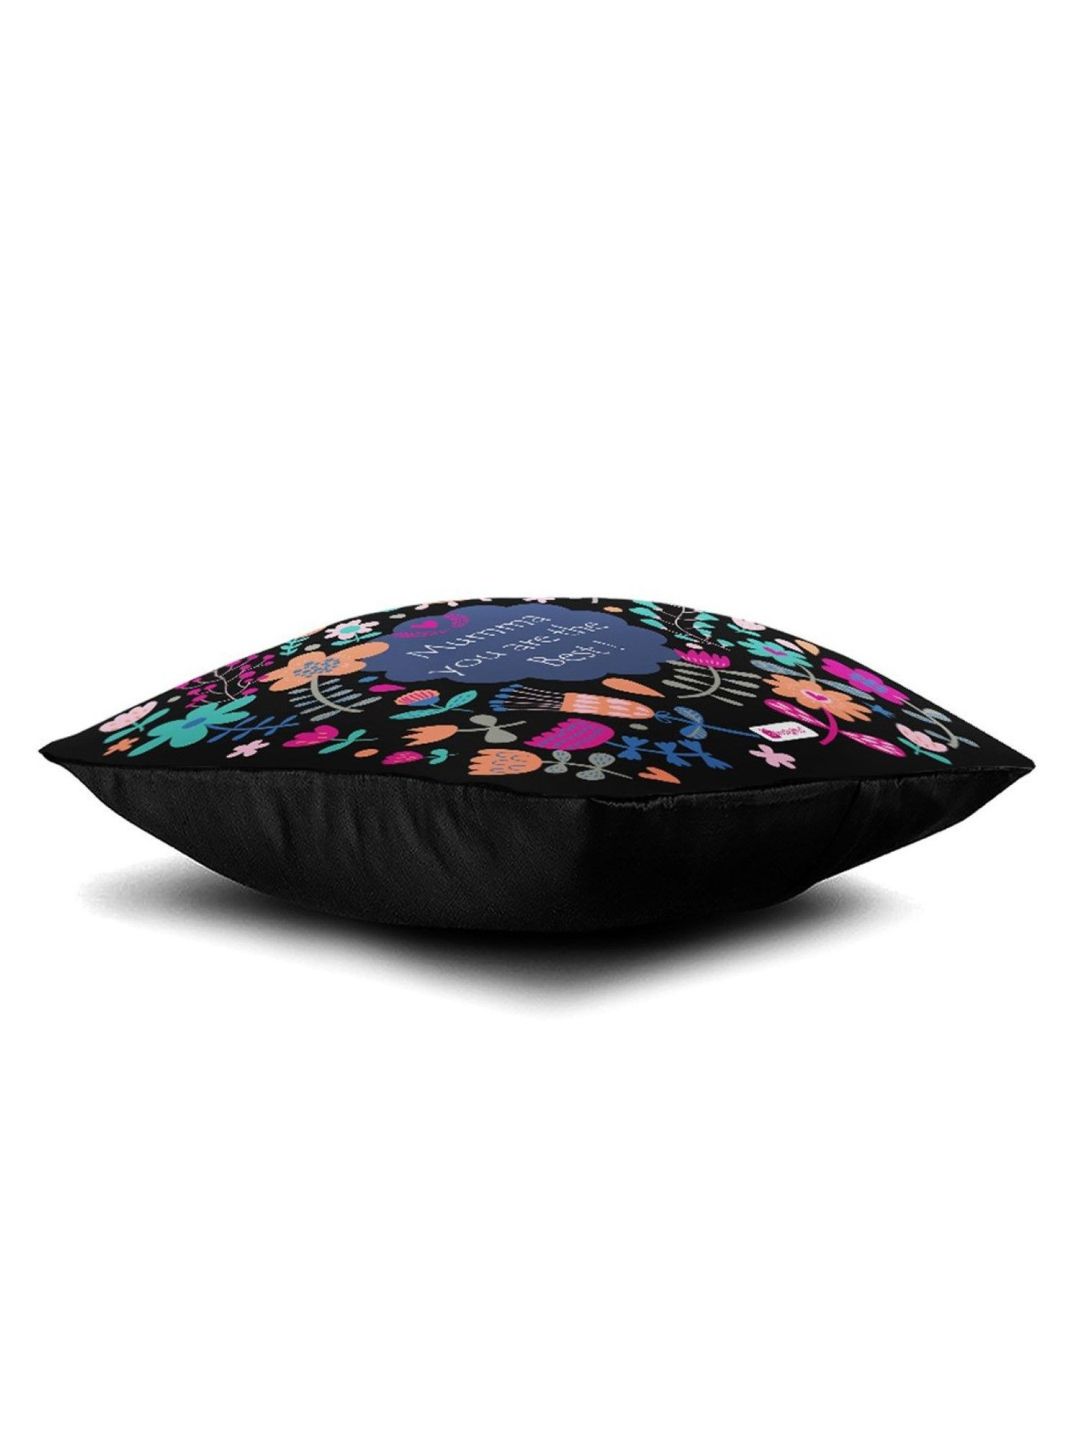 Indigifts Satin Mug and Cushion Cover with Filler – 1 Mug 1 Cushion Cover| 12×12 inches| 1 Pack Filler | MATERIAL – CUSHION : Soft Poly Satin| Black Colored Cotton Overlap Envelop Backing